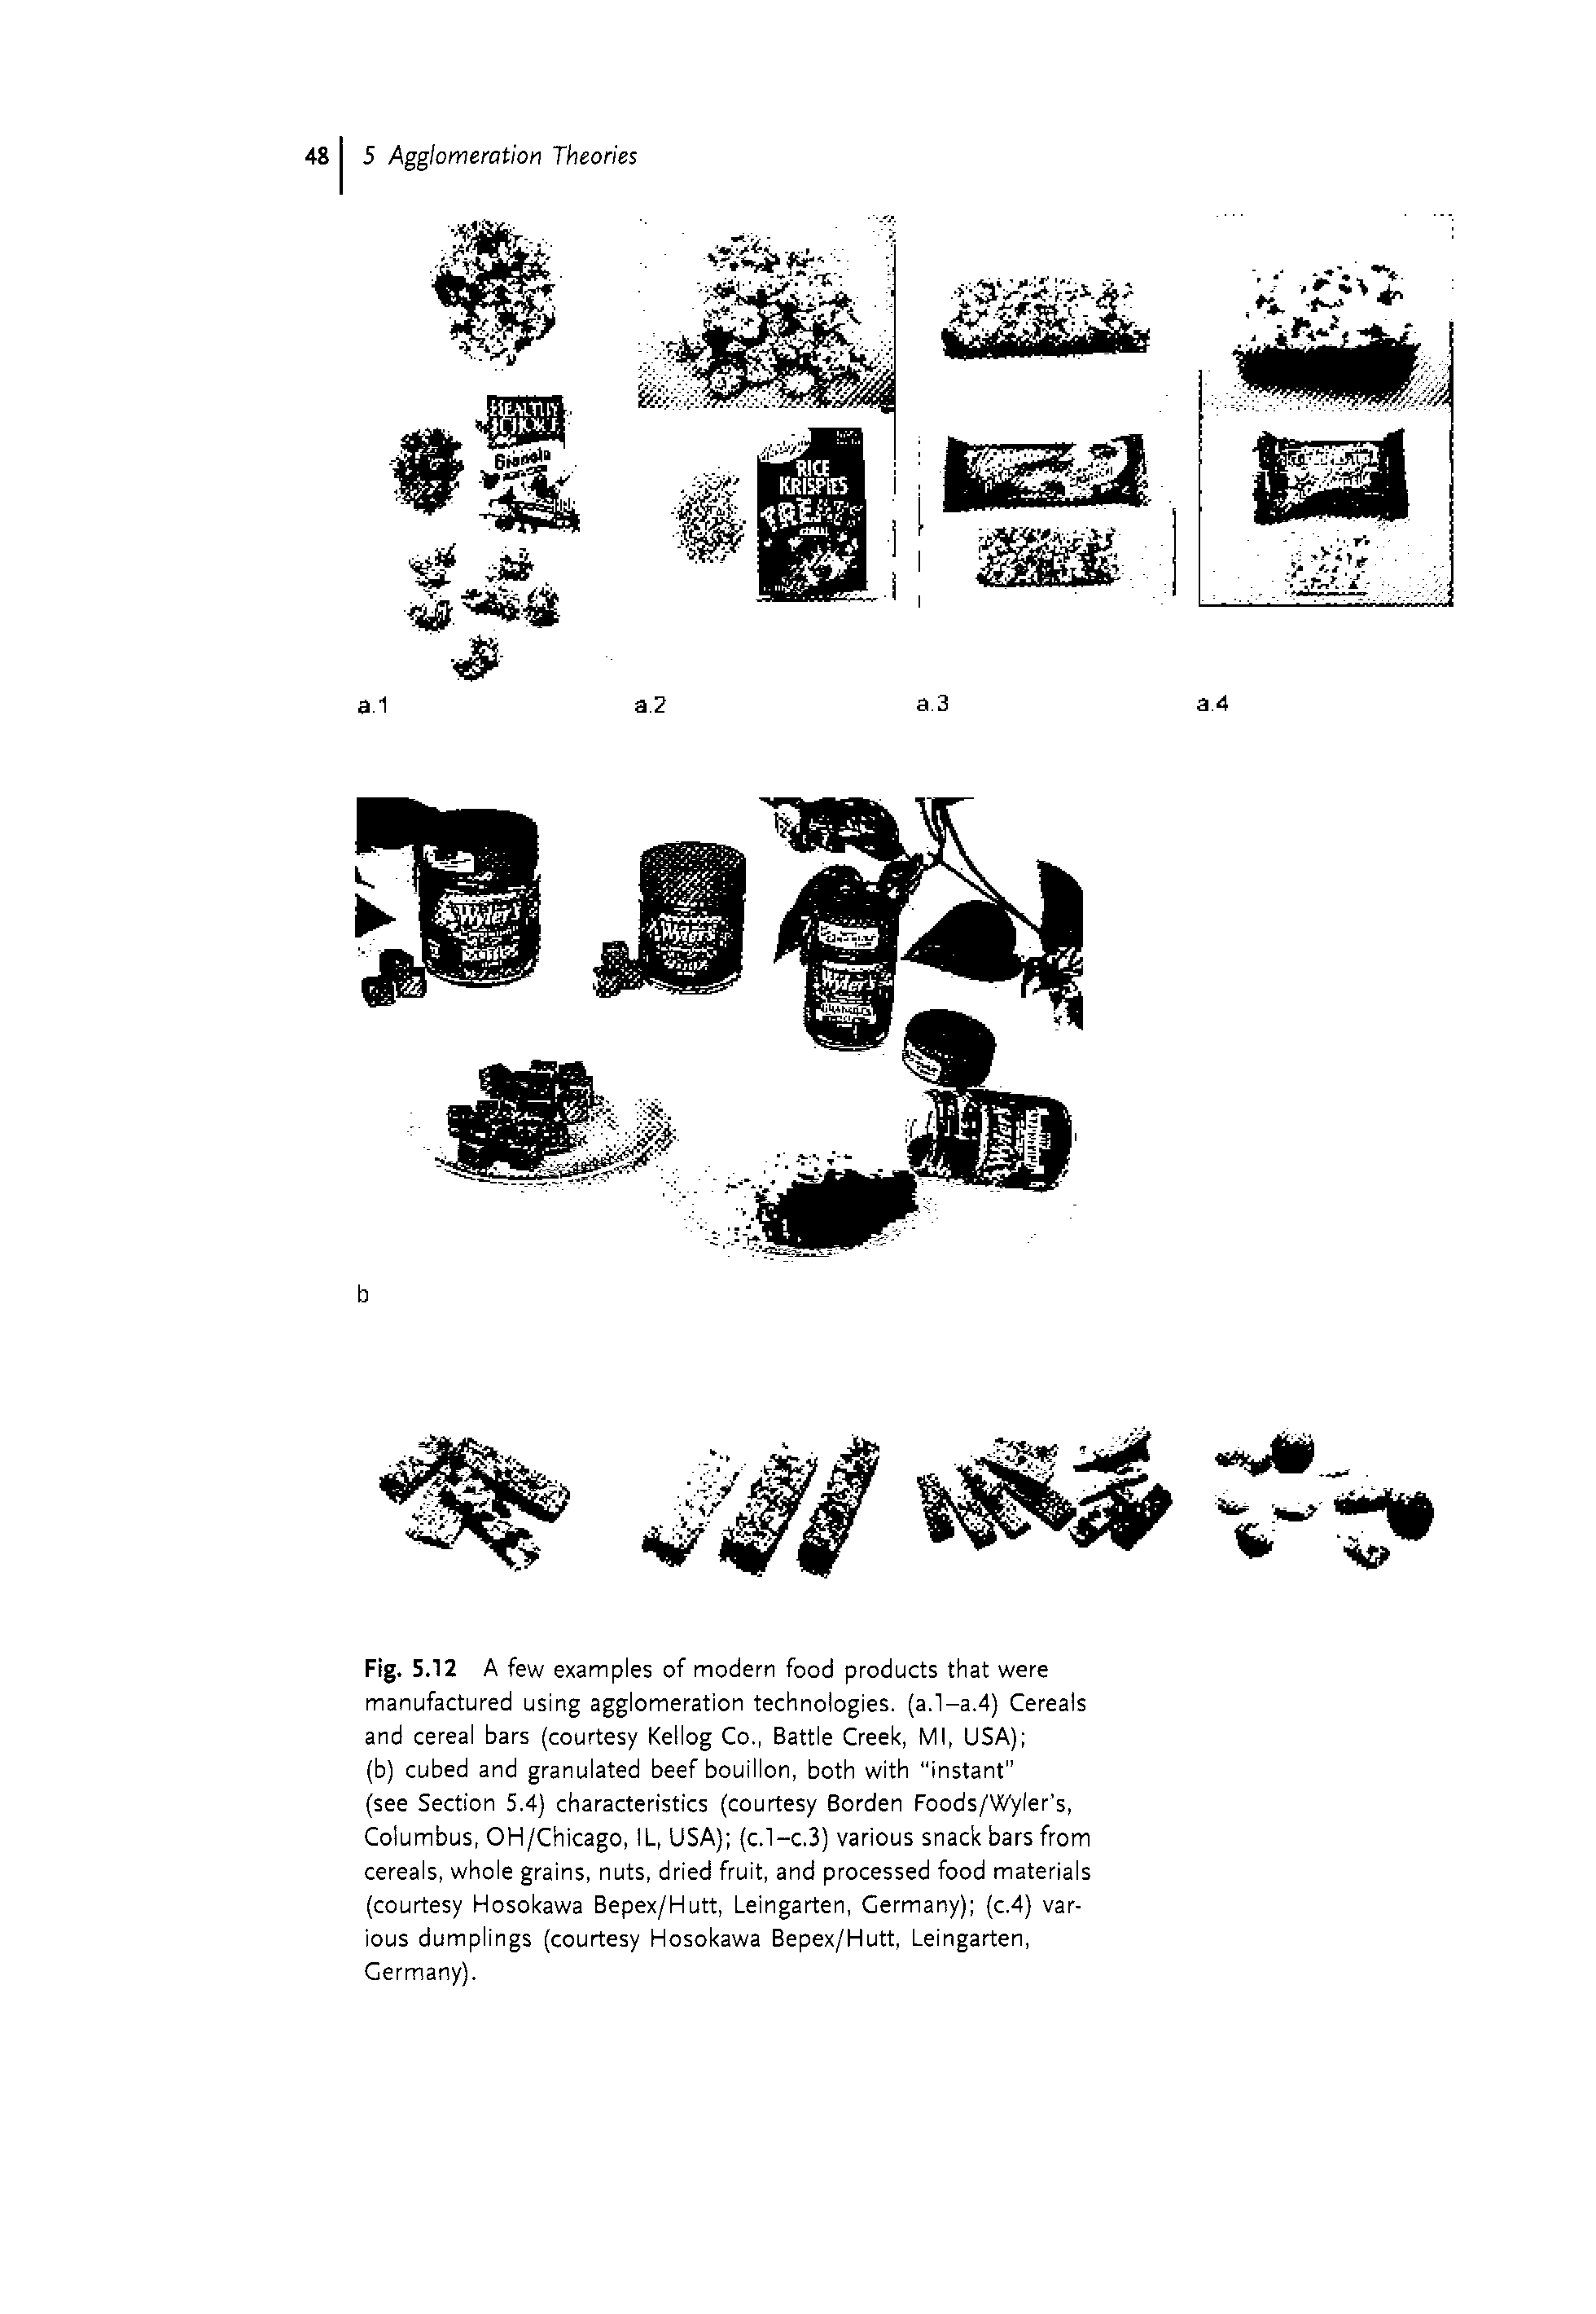 Fig. 5.12 A few examples of modern food products that were manufactured using agglomeration technologies, (a.l-a.4) Cereals and cereal bars (courtesy Kellog Co., Battle Creek, Ml, USA) ...